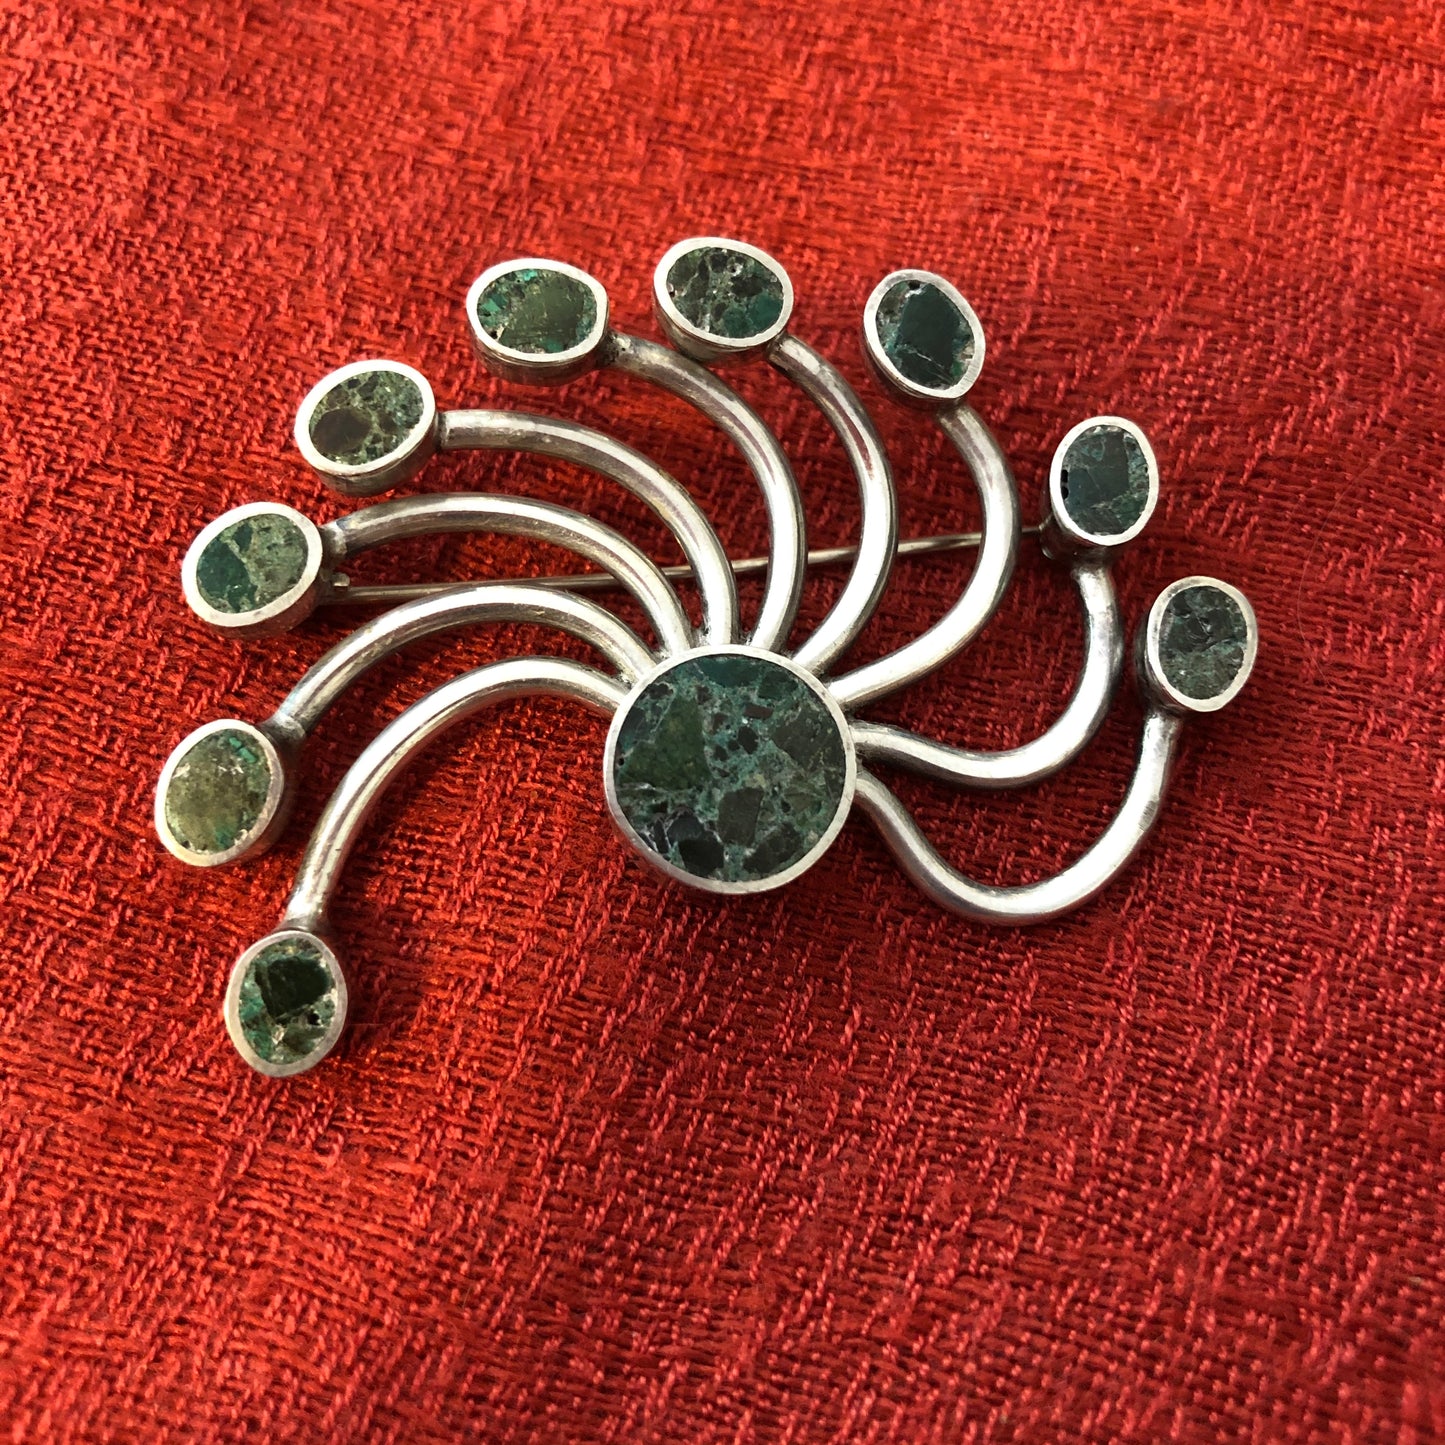 Vintage 1970's Crushed Turquoise Spindly Brooch